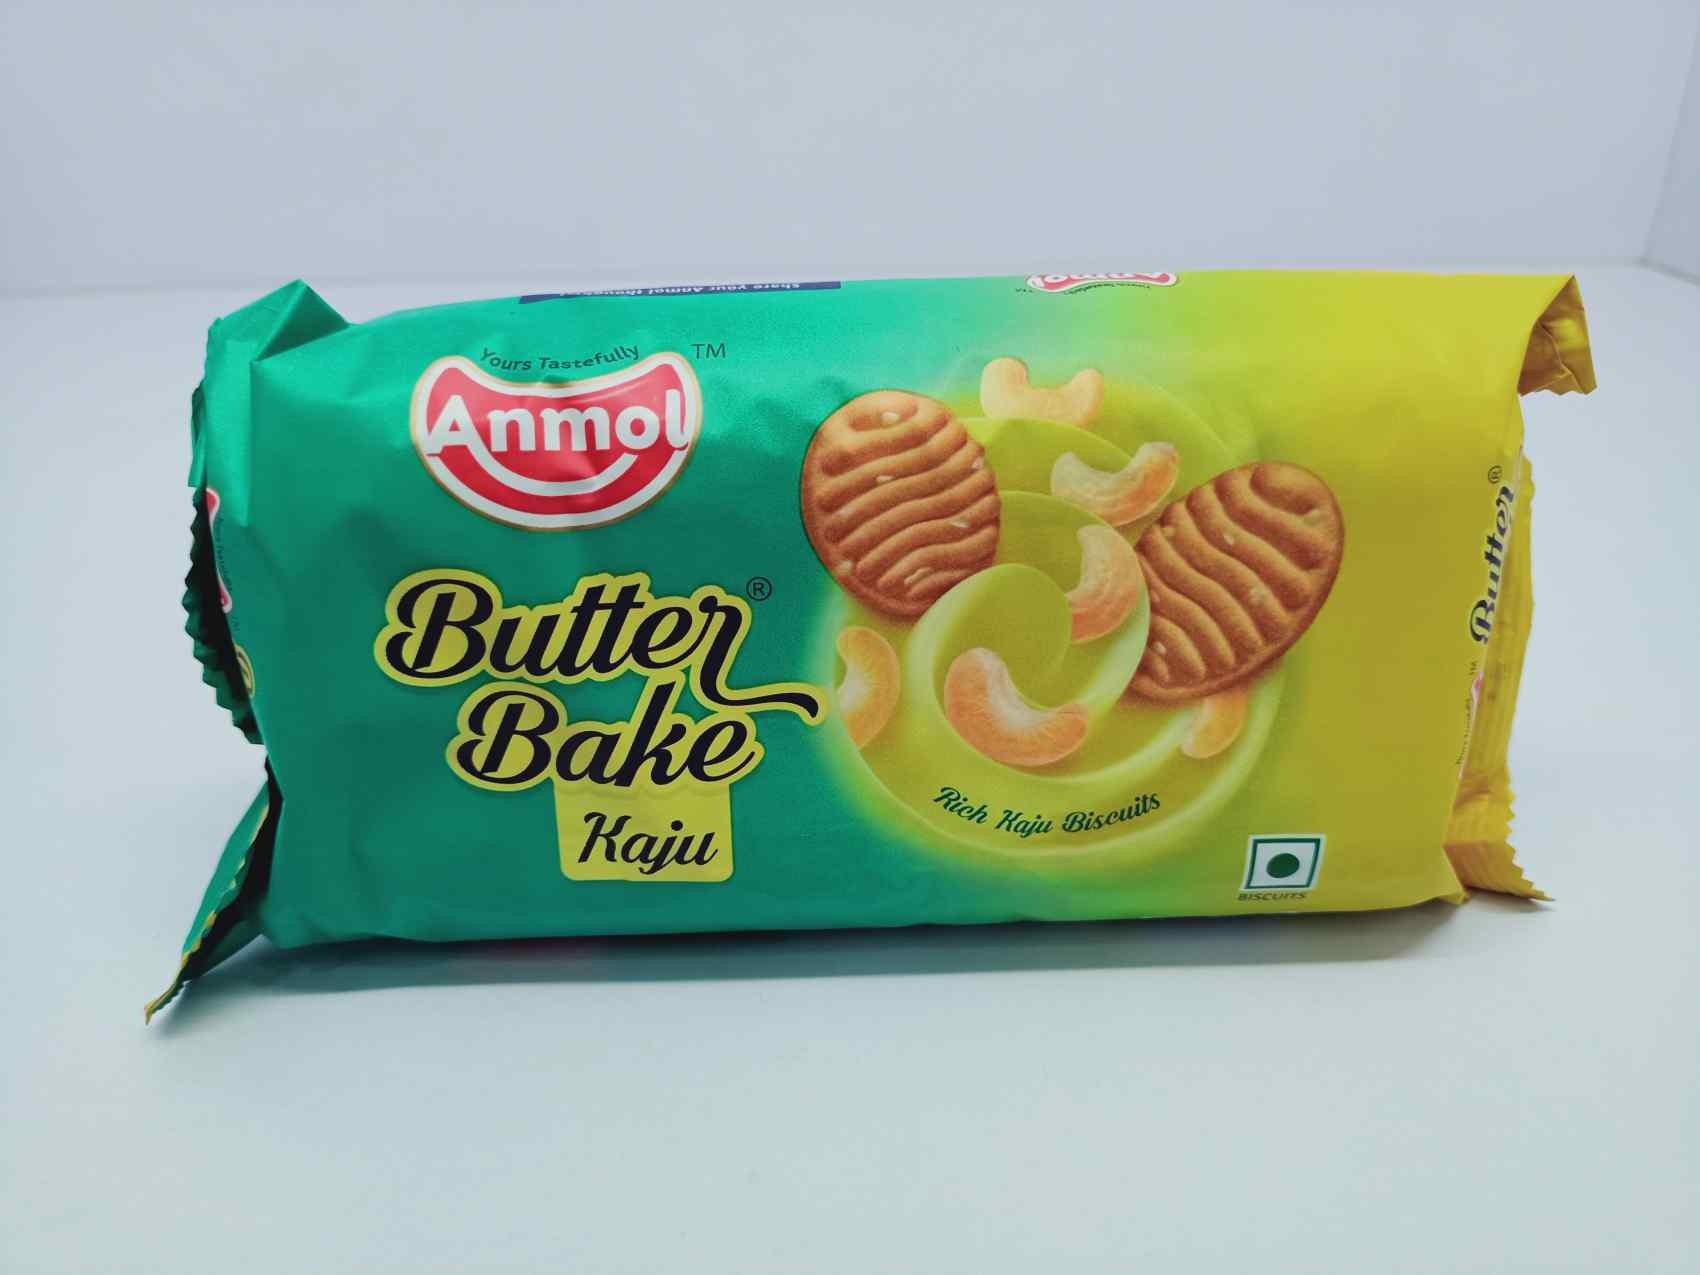 Top 10 Best and Most Popular Biscuit Brands in the World